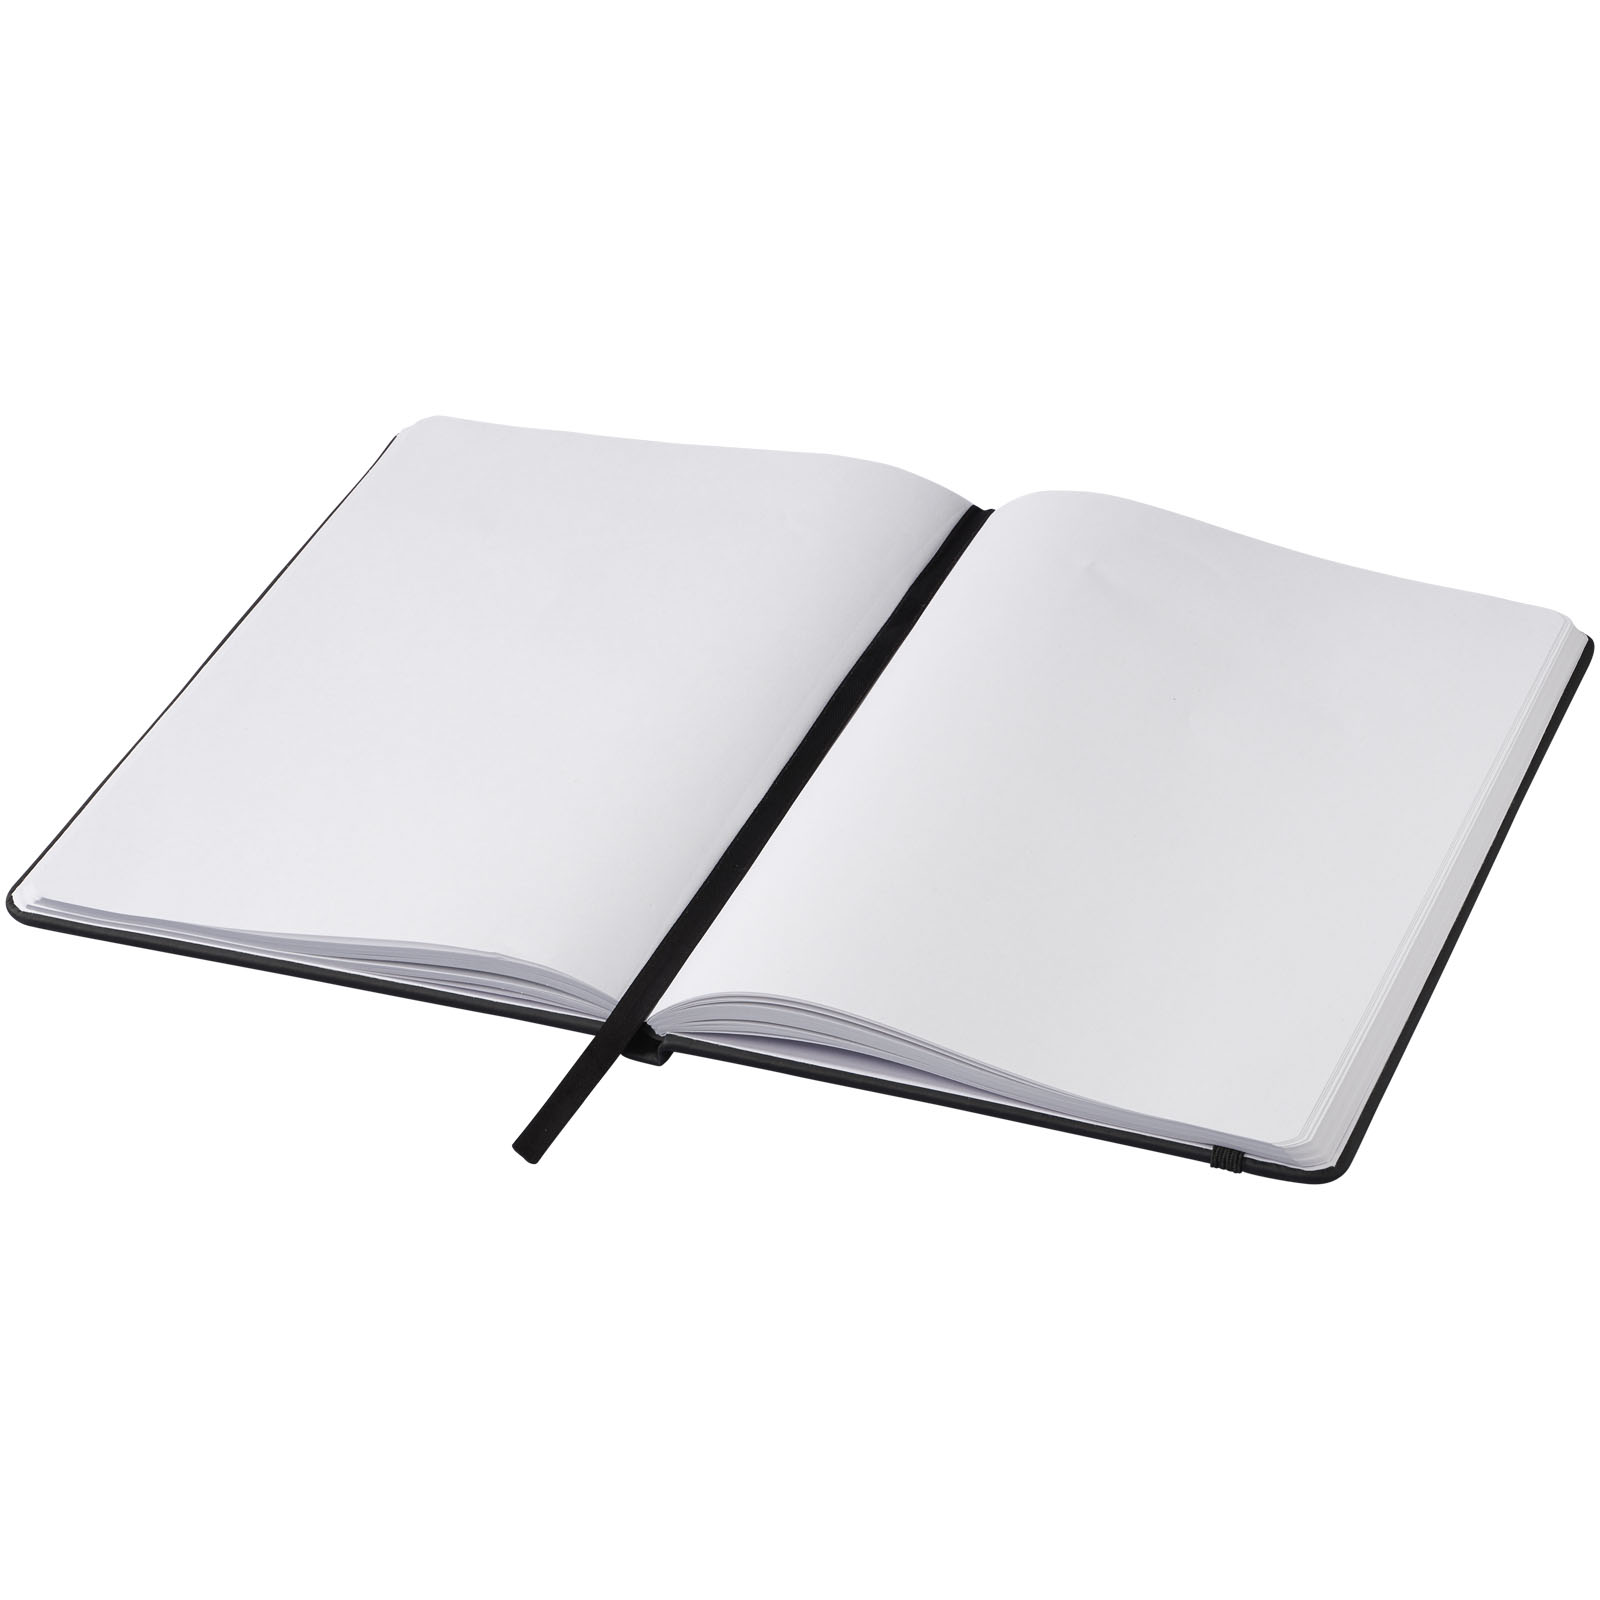 Advertising Hard cover notebooks - Spectrum A5 notebook with blank pages - 2